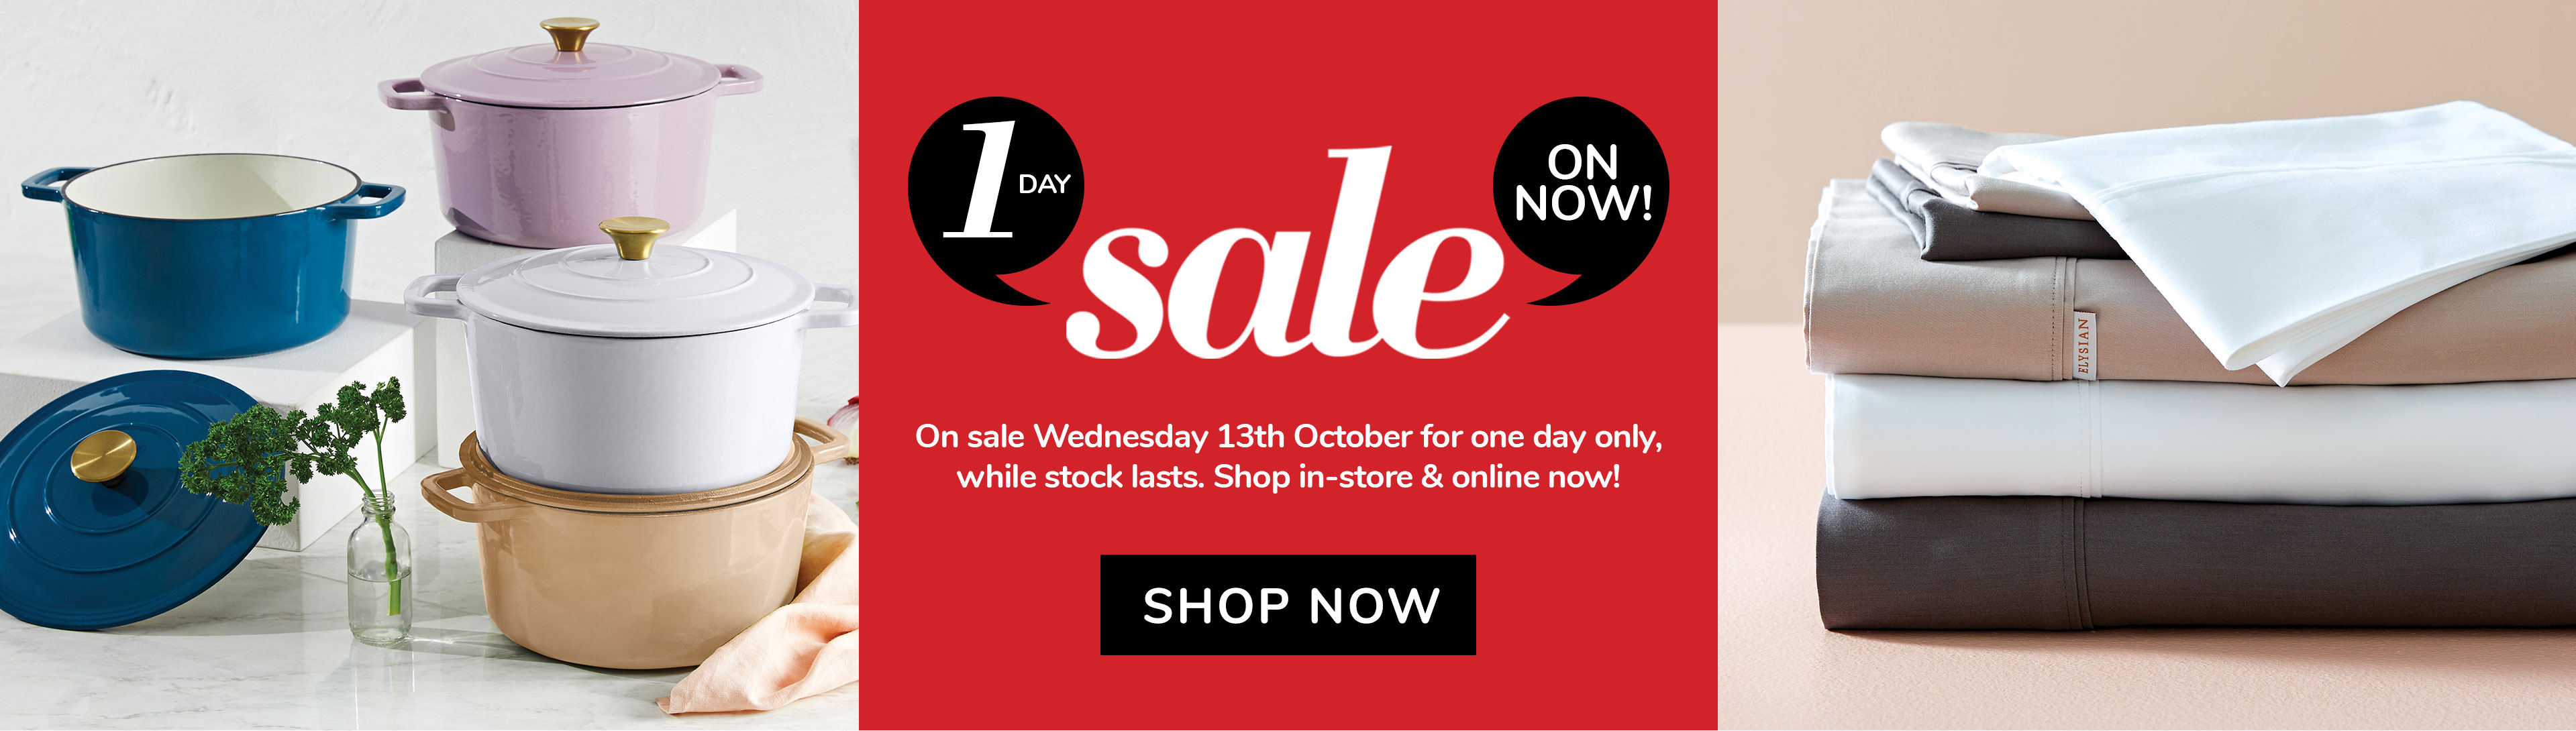 Harris Scarfe 1 Day sale up to 50% OFF on homeware, clothing & footwear